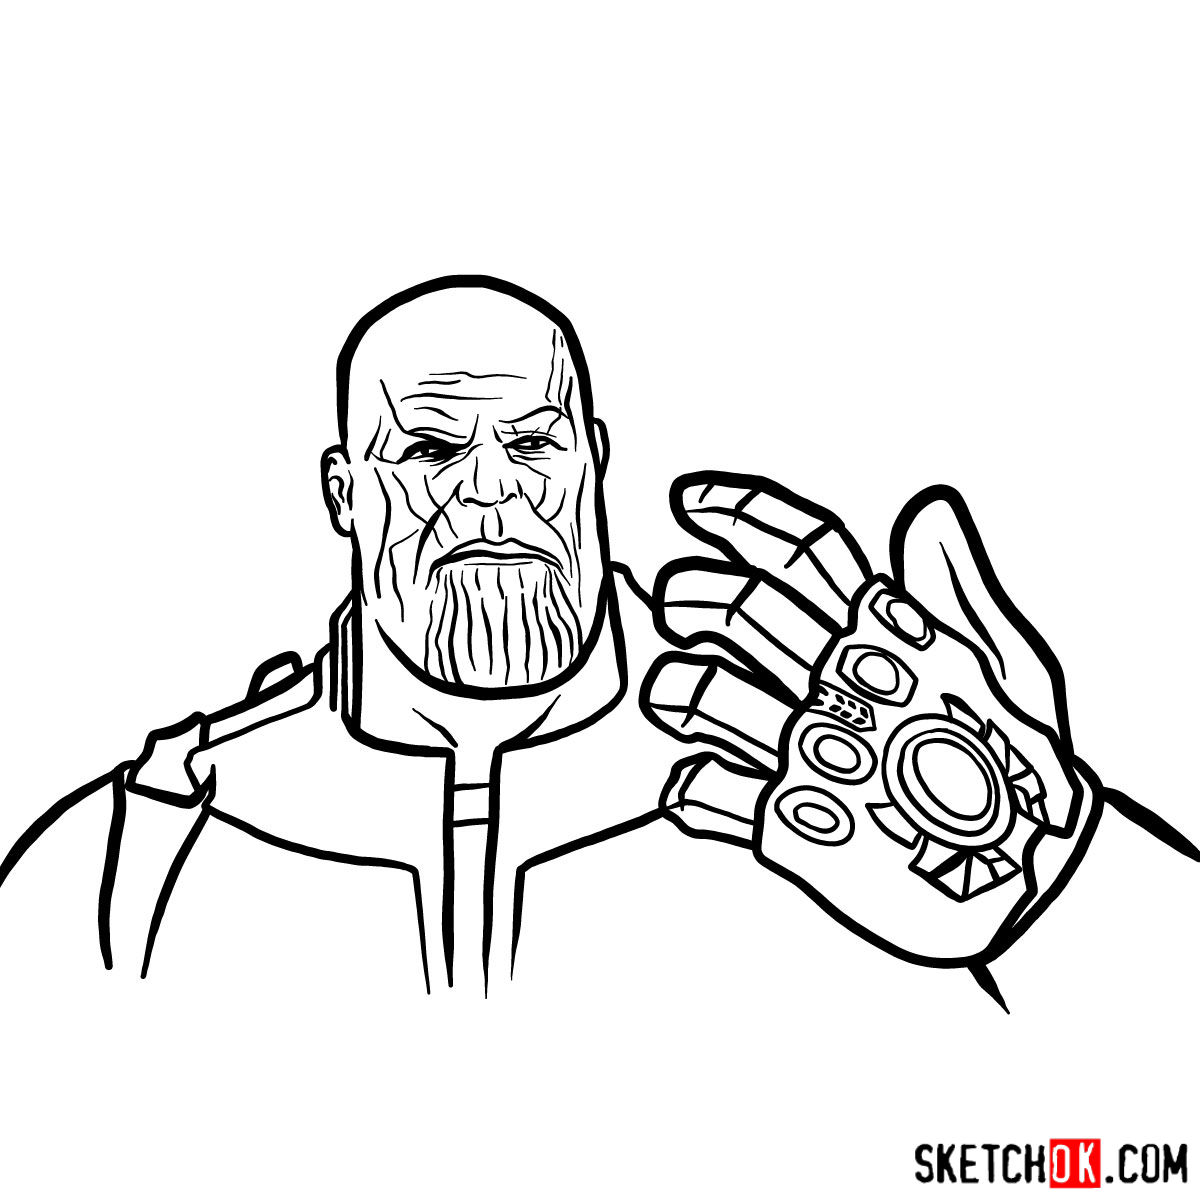 How to draw Thanos from the Avengers: Infinity War 2018 film - step 15